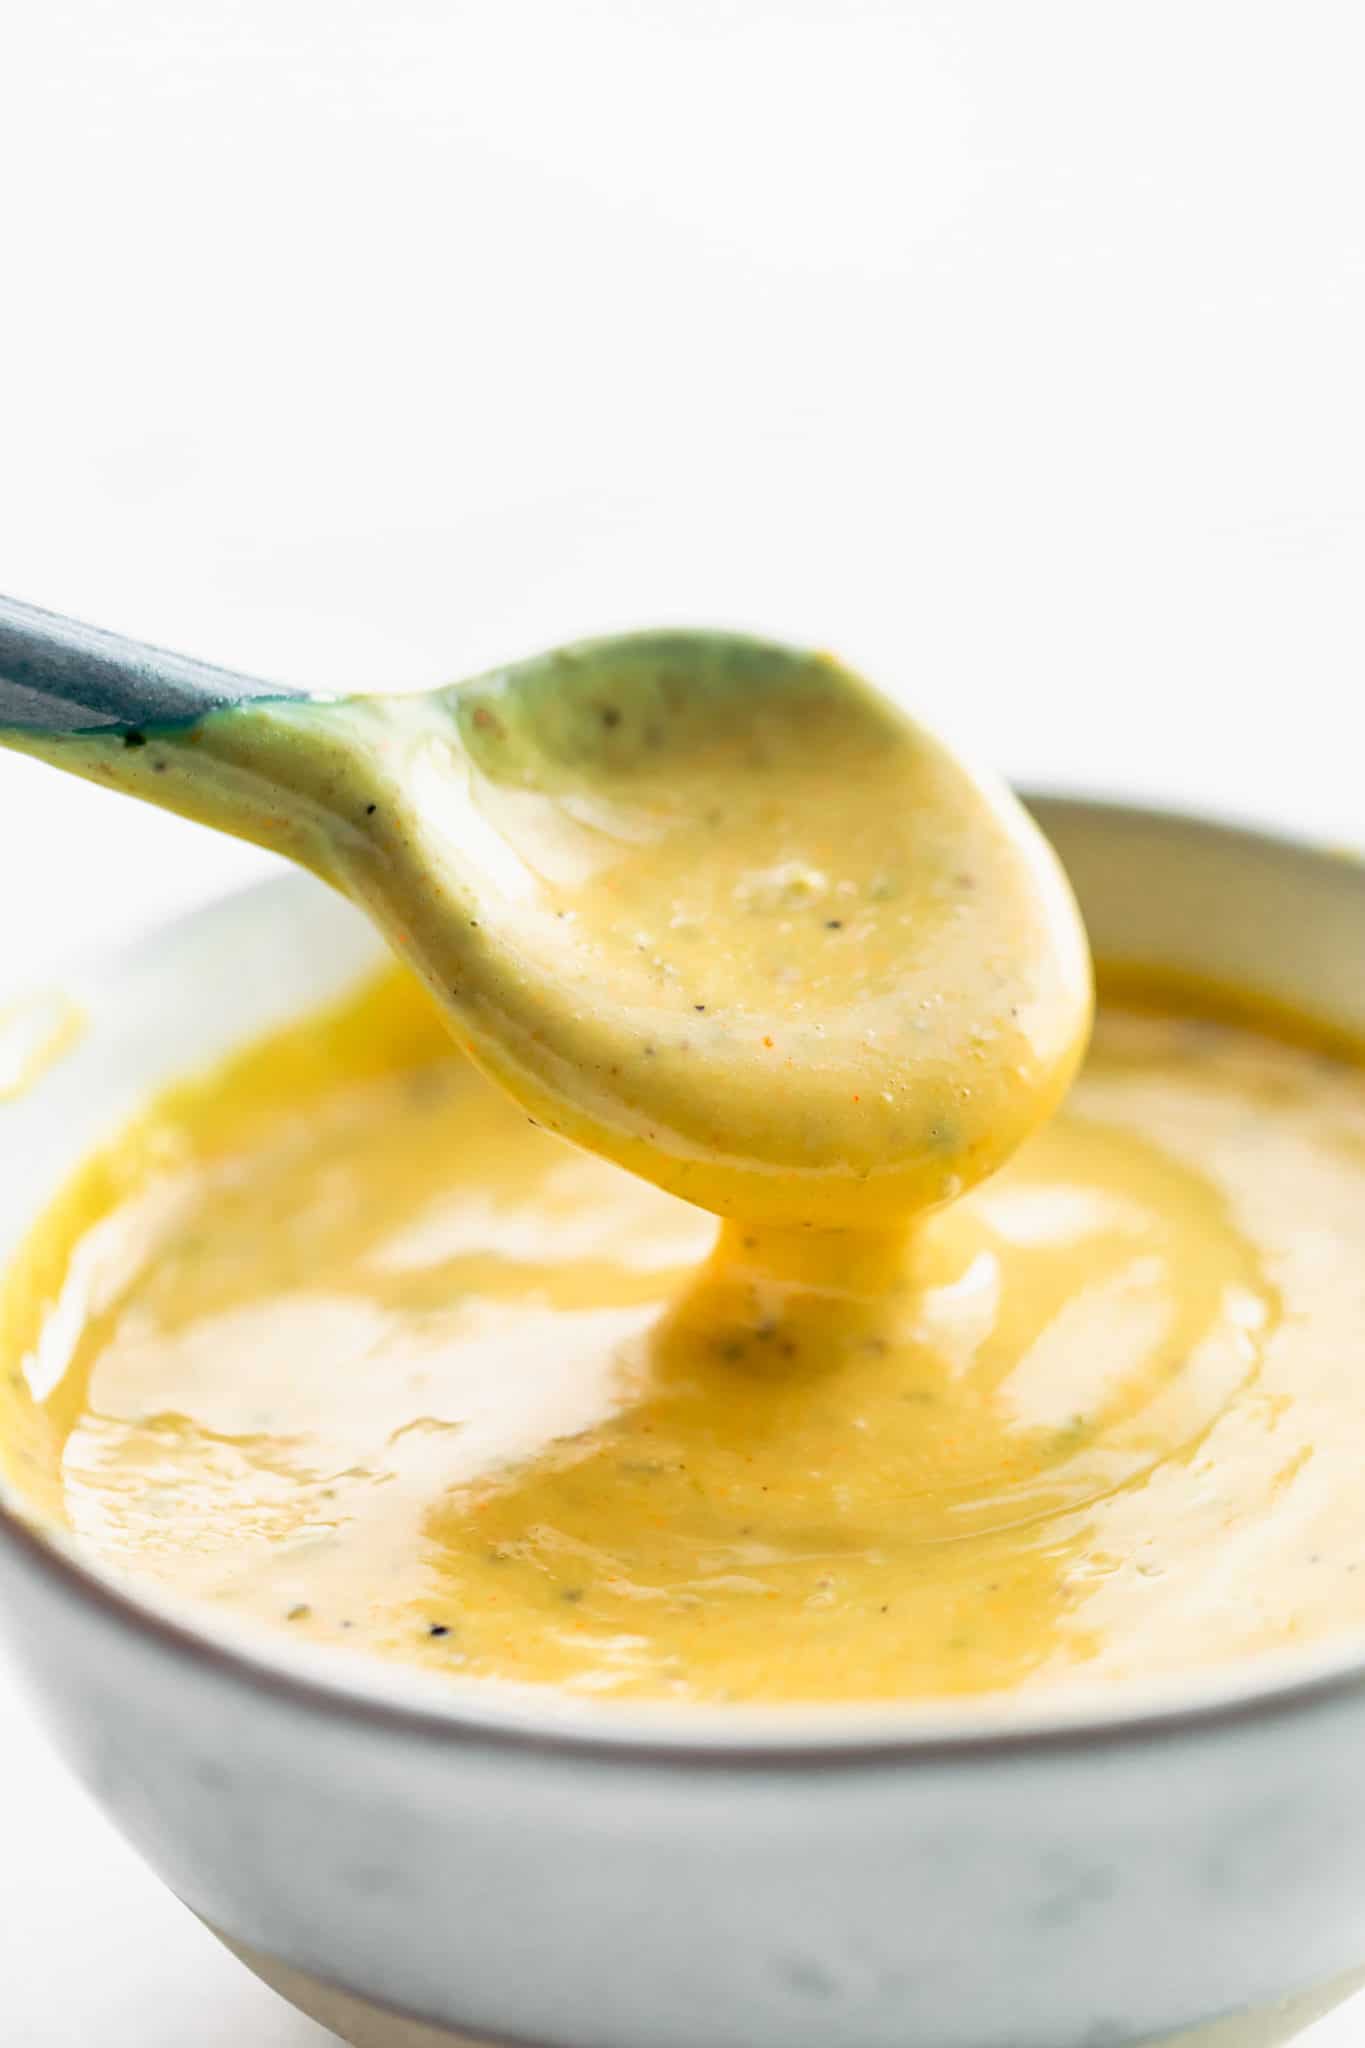 side image of a small sauce spoon dipping into a white bowl full of creamy mustard sauce